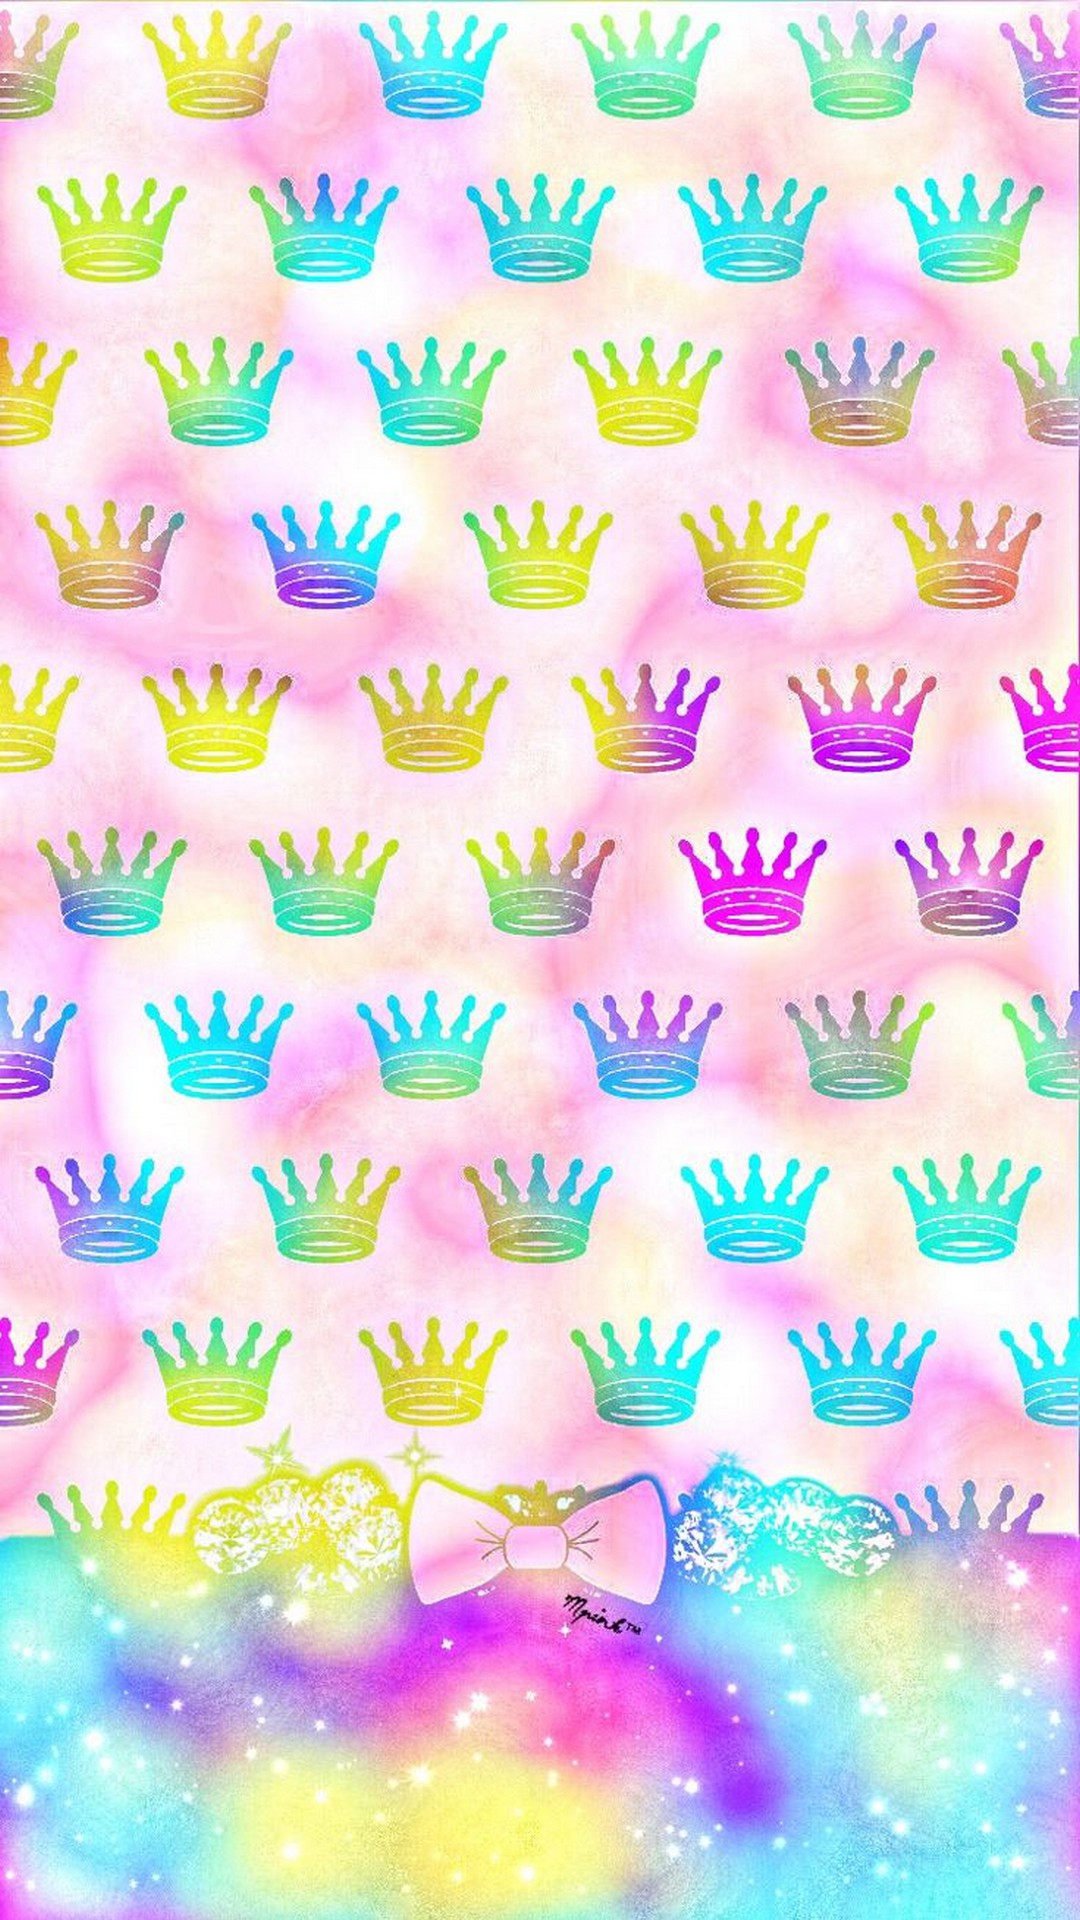 Girly Wallpaper For iPhone 7 Plus 1080x1920